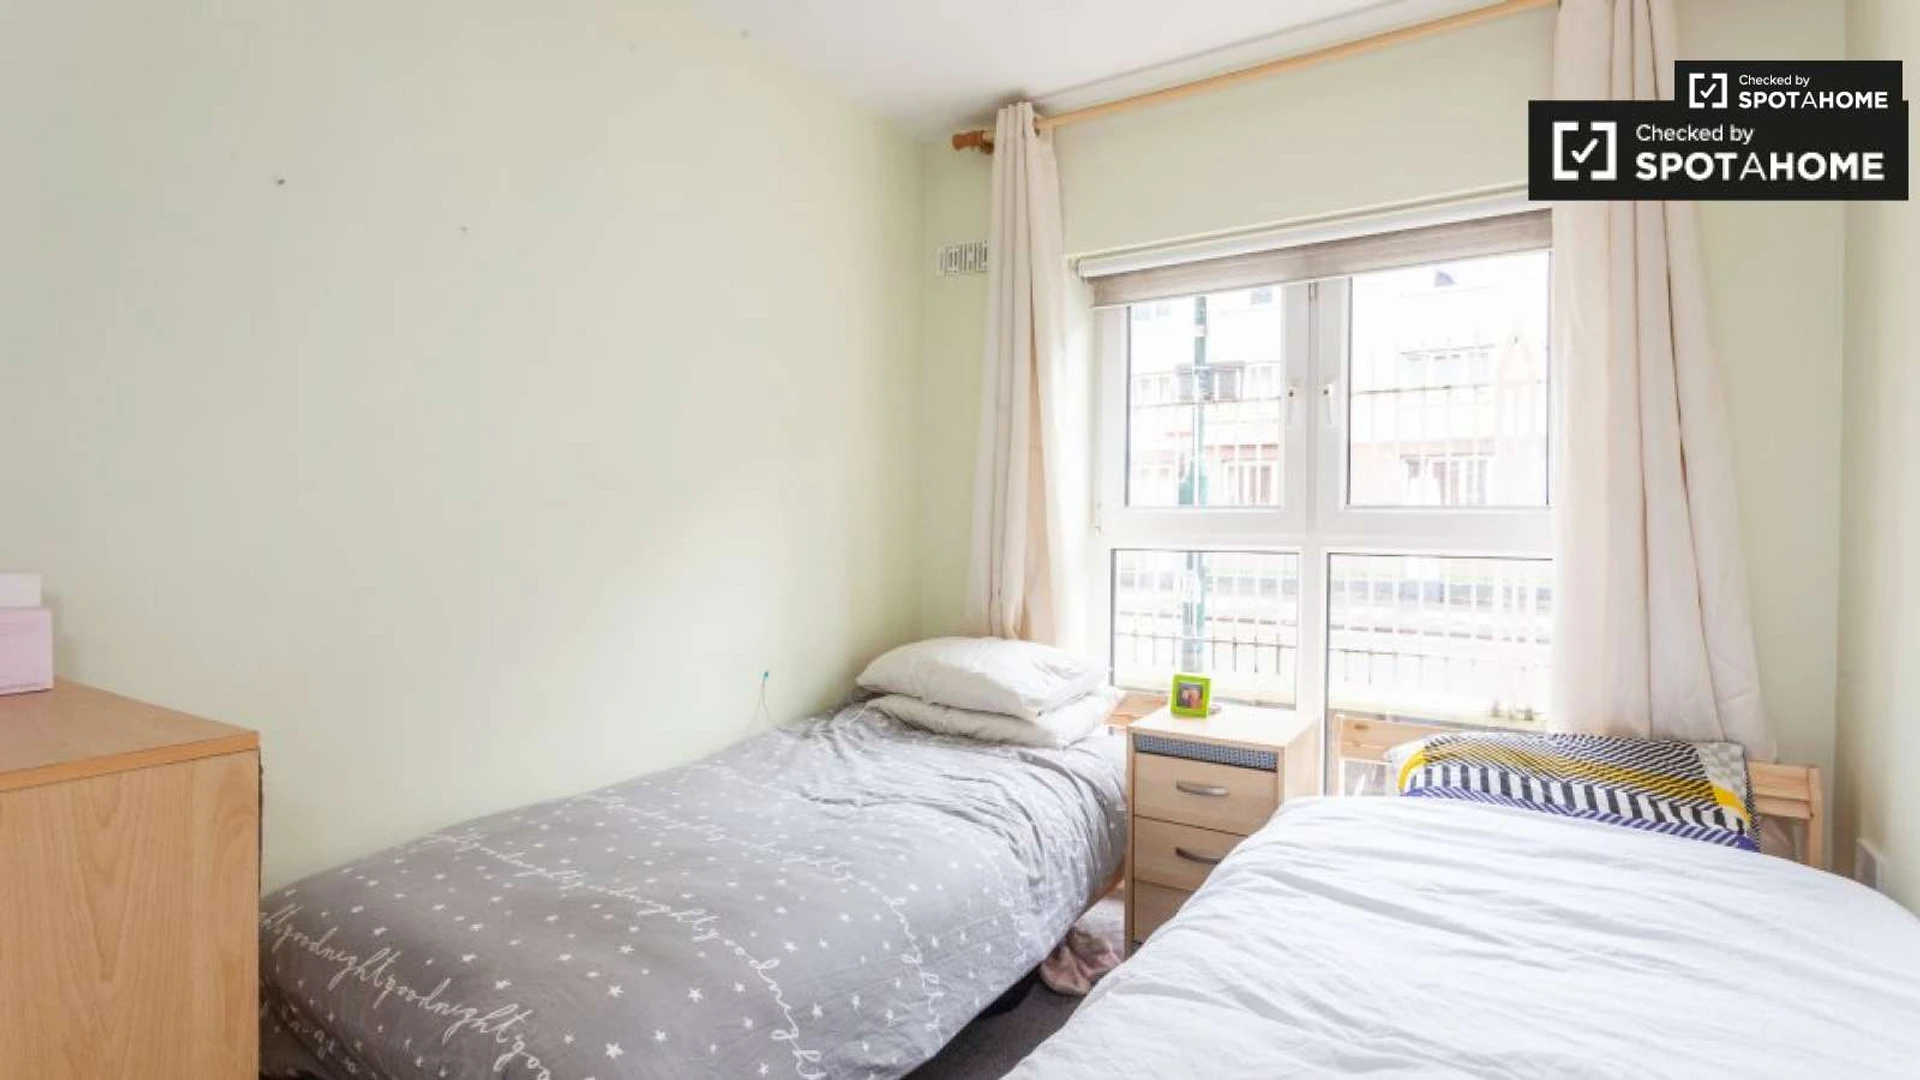 Room for rent in a shared flat in dublin